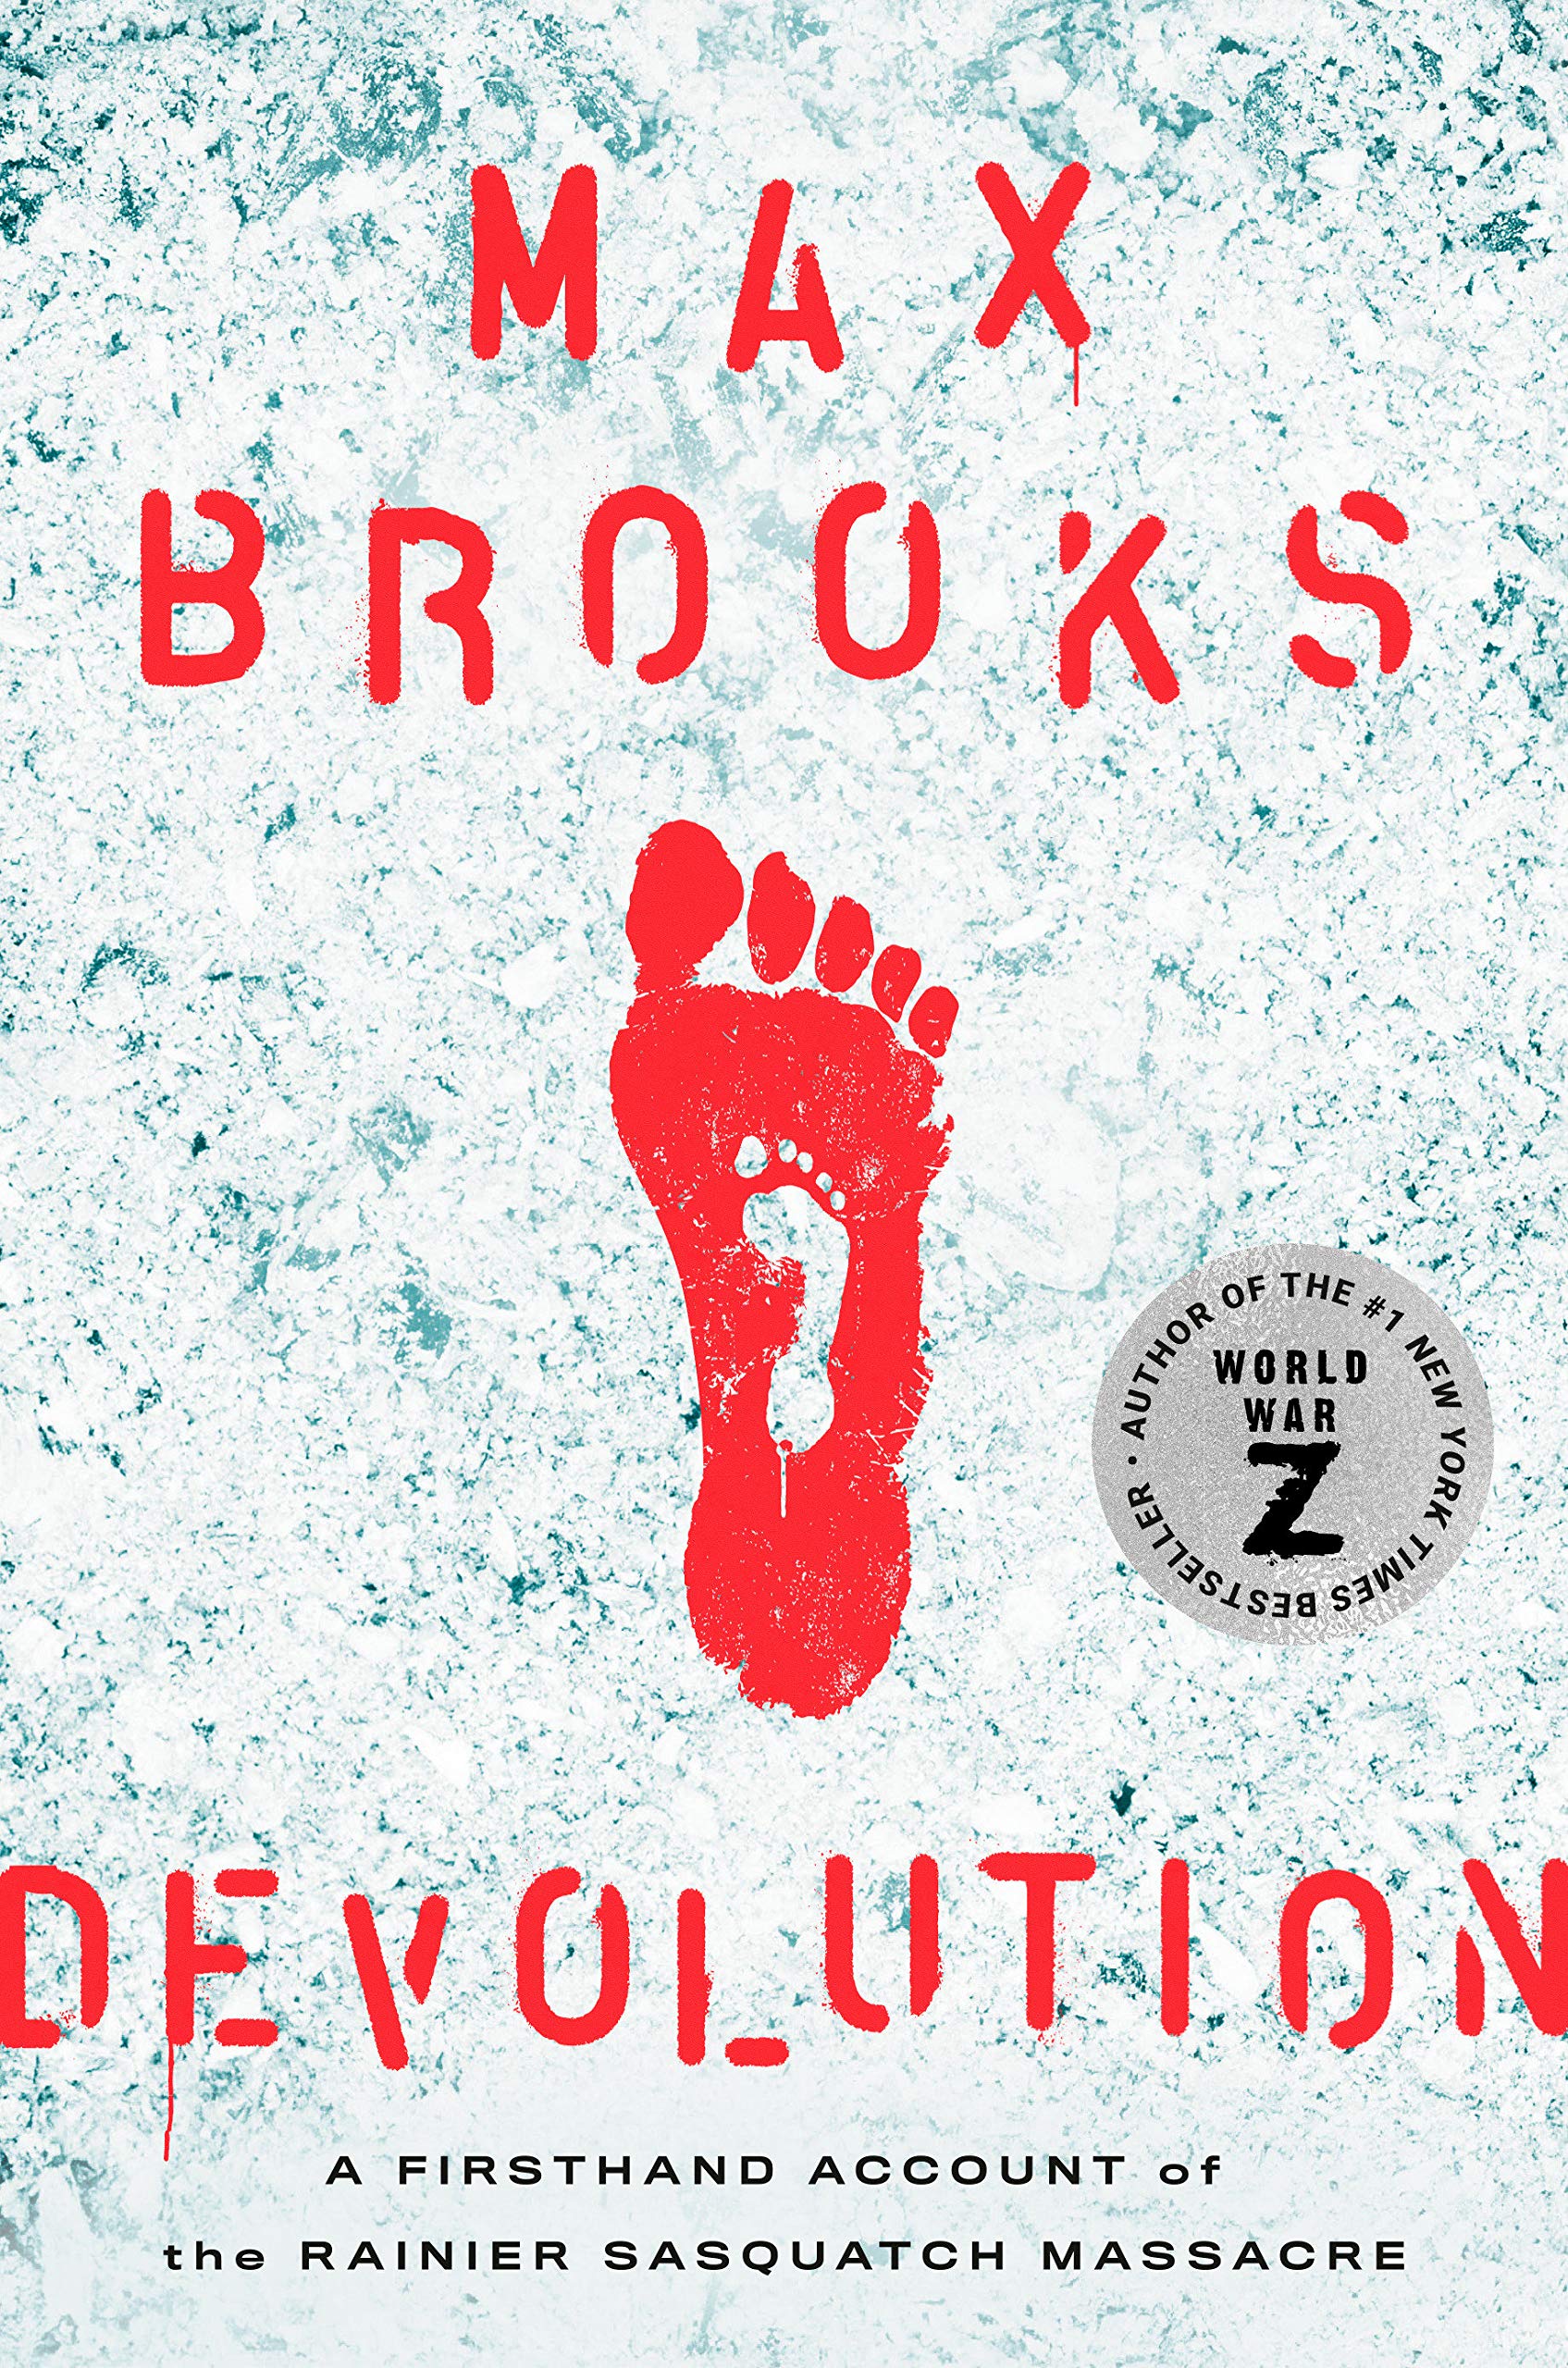 Cover of Devolution by Max Brooks